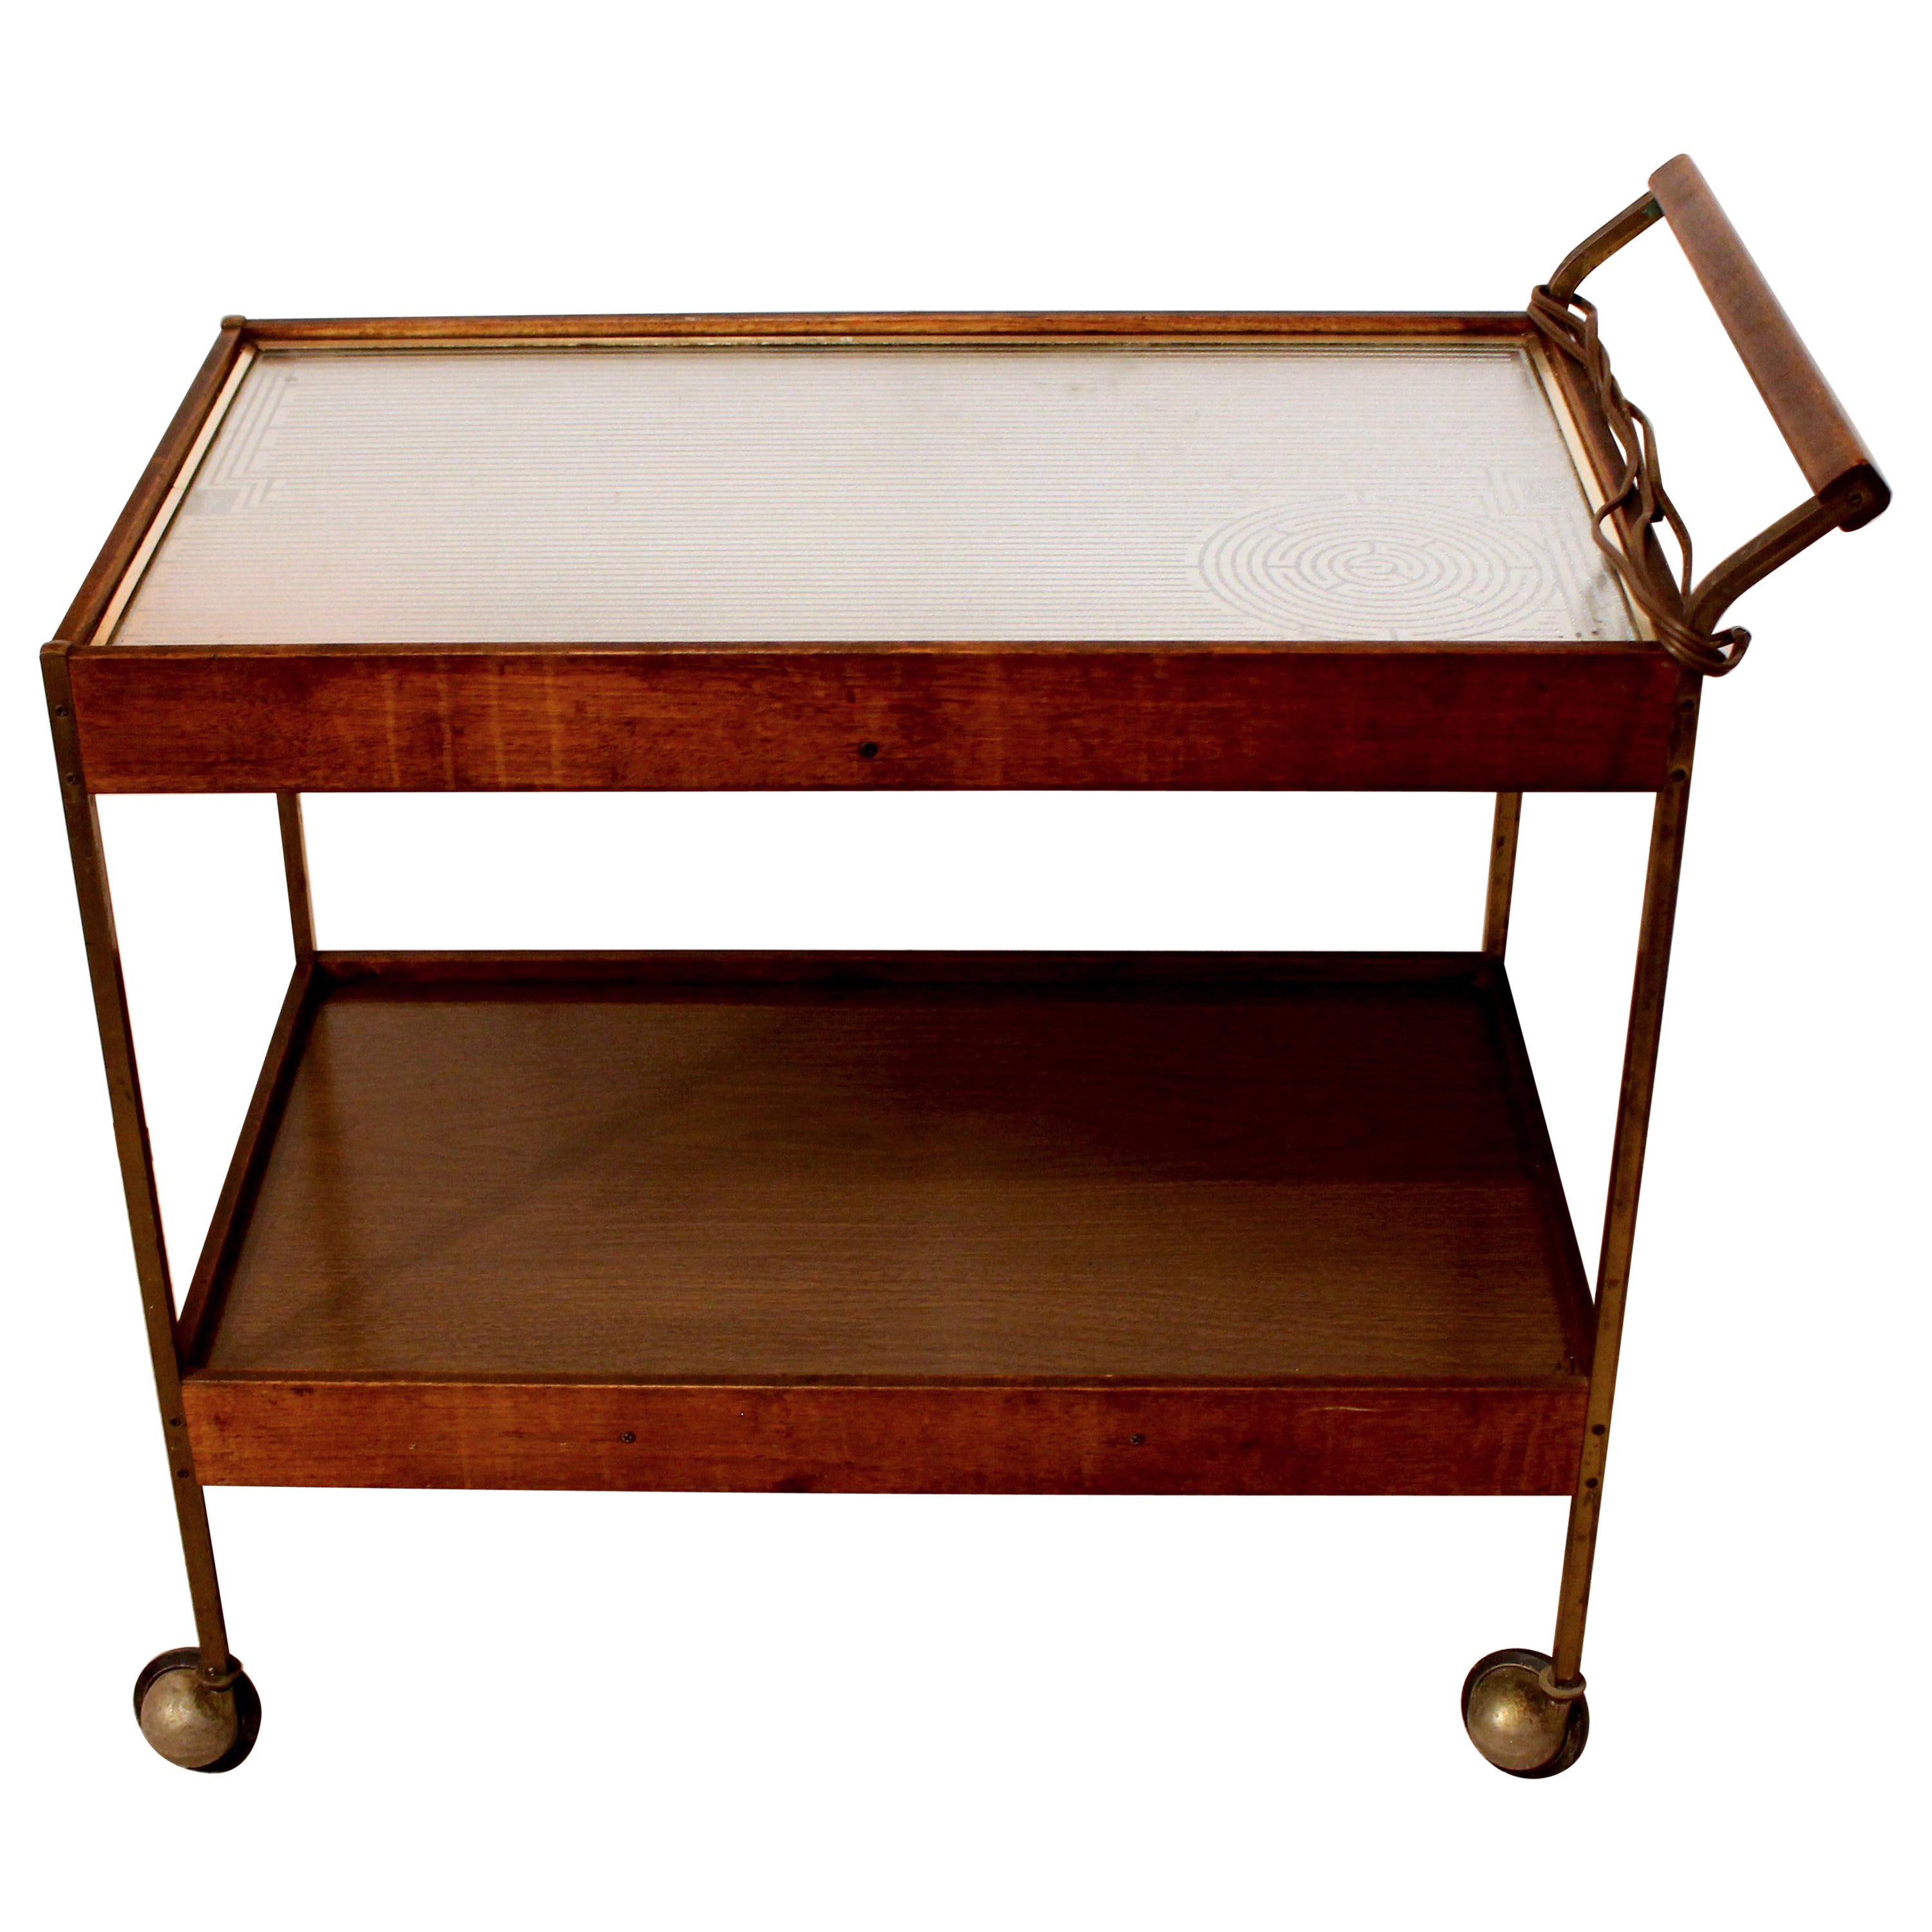  Circa 1950s-60s Salton "Hot Tray" Serving Trolley, American For Sale